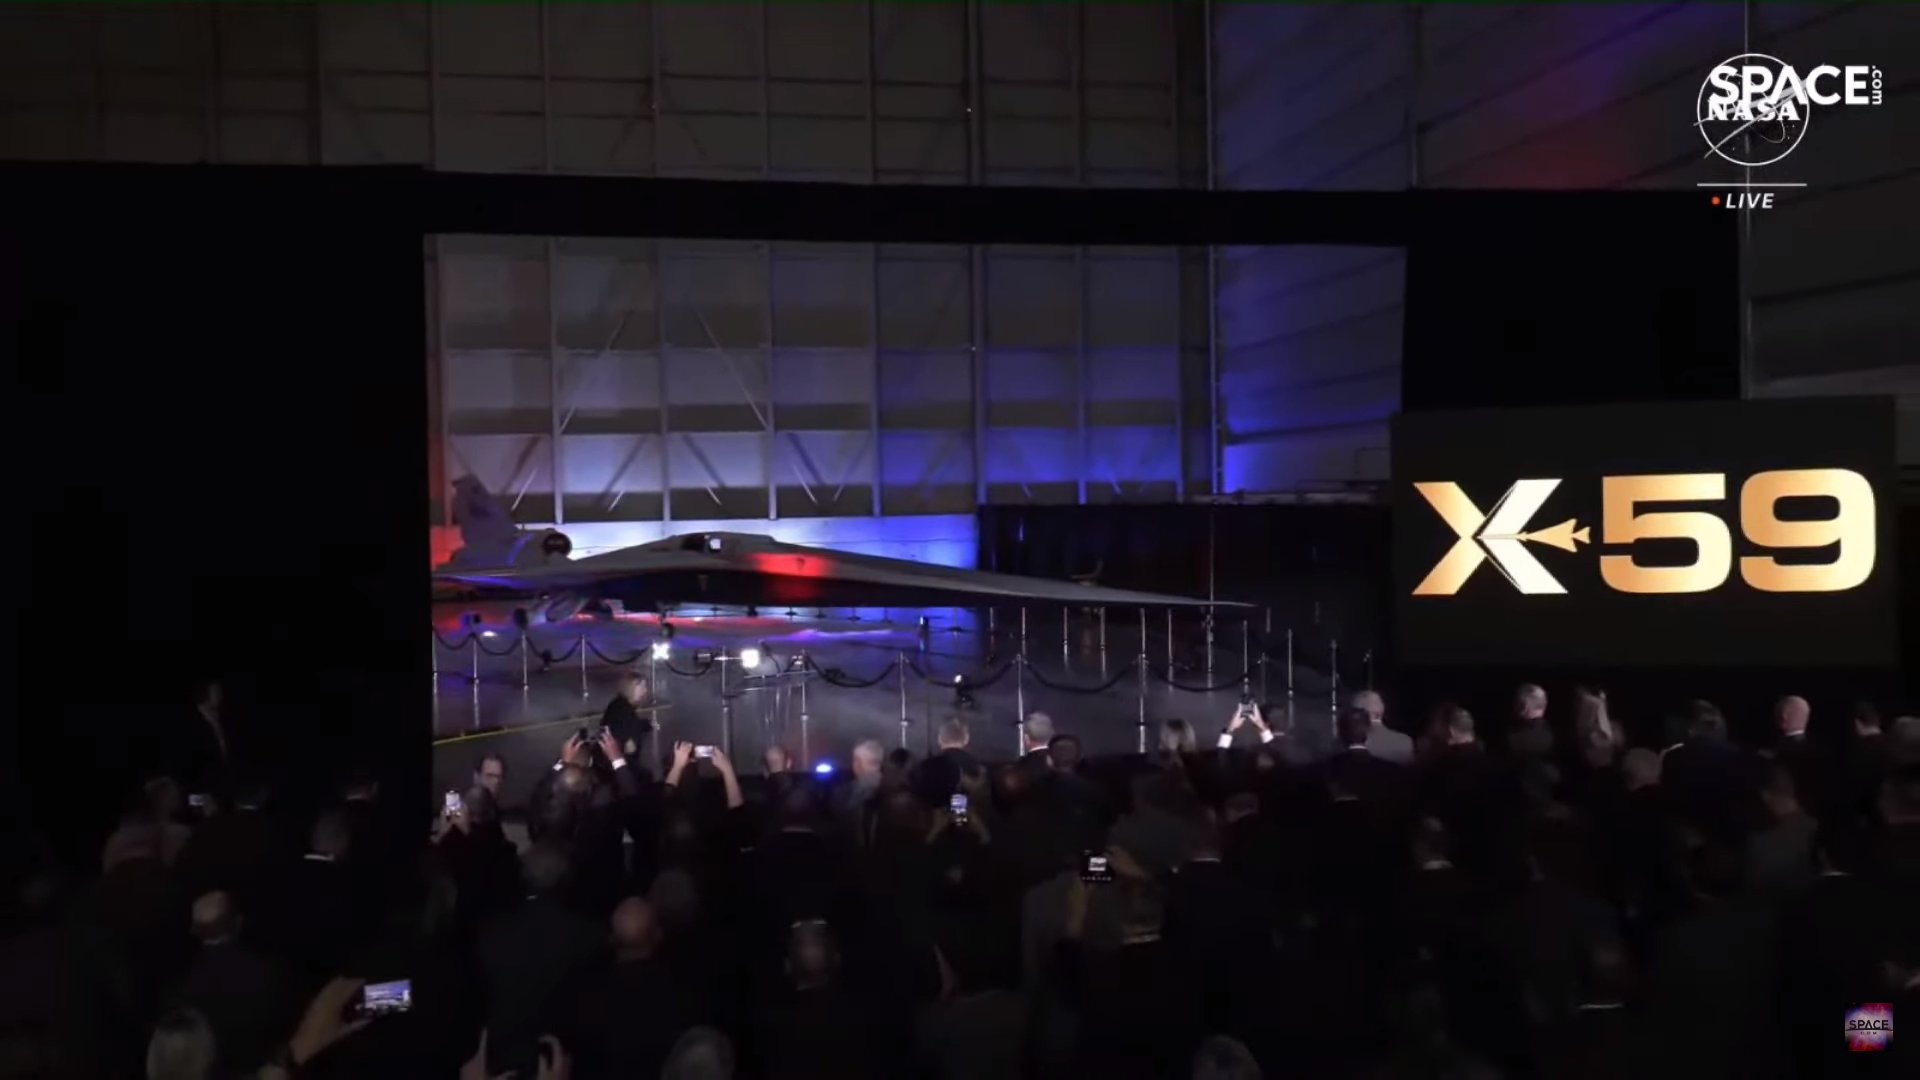 A crowd watches a sleek supersnic jet revealed in a hangar